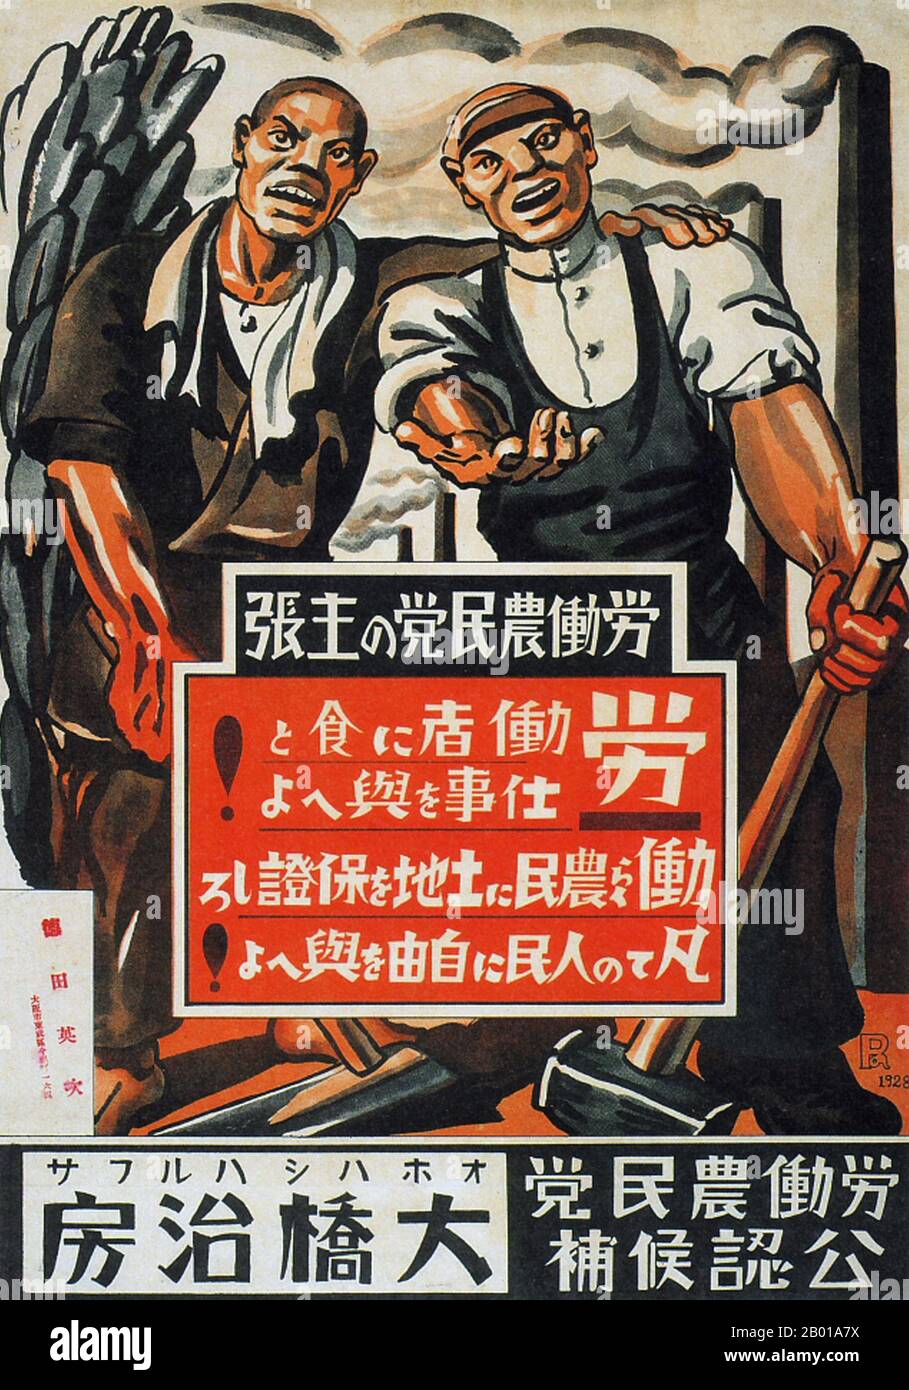 Japan: 'Harufusa Ohashi'. Leftist election poster for Labour-Farmer Party, 1928.  During late 1920s and 1930s Japan, a new poster style developed that reflected the growing influence of the masses in Japanese society. These art posters were strongly influenced by the emerging political forces of Communism and Fascism in Europe and the Soviet Union, adopting a style that incorporated bold slogans with artistic themes ranging from Leftist socialist realism through Stateism and state-directed public welfare, to Militarism and Imperialist expansionism. Stock Photo